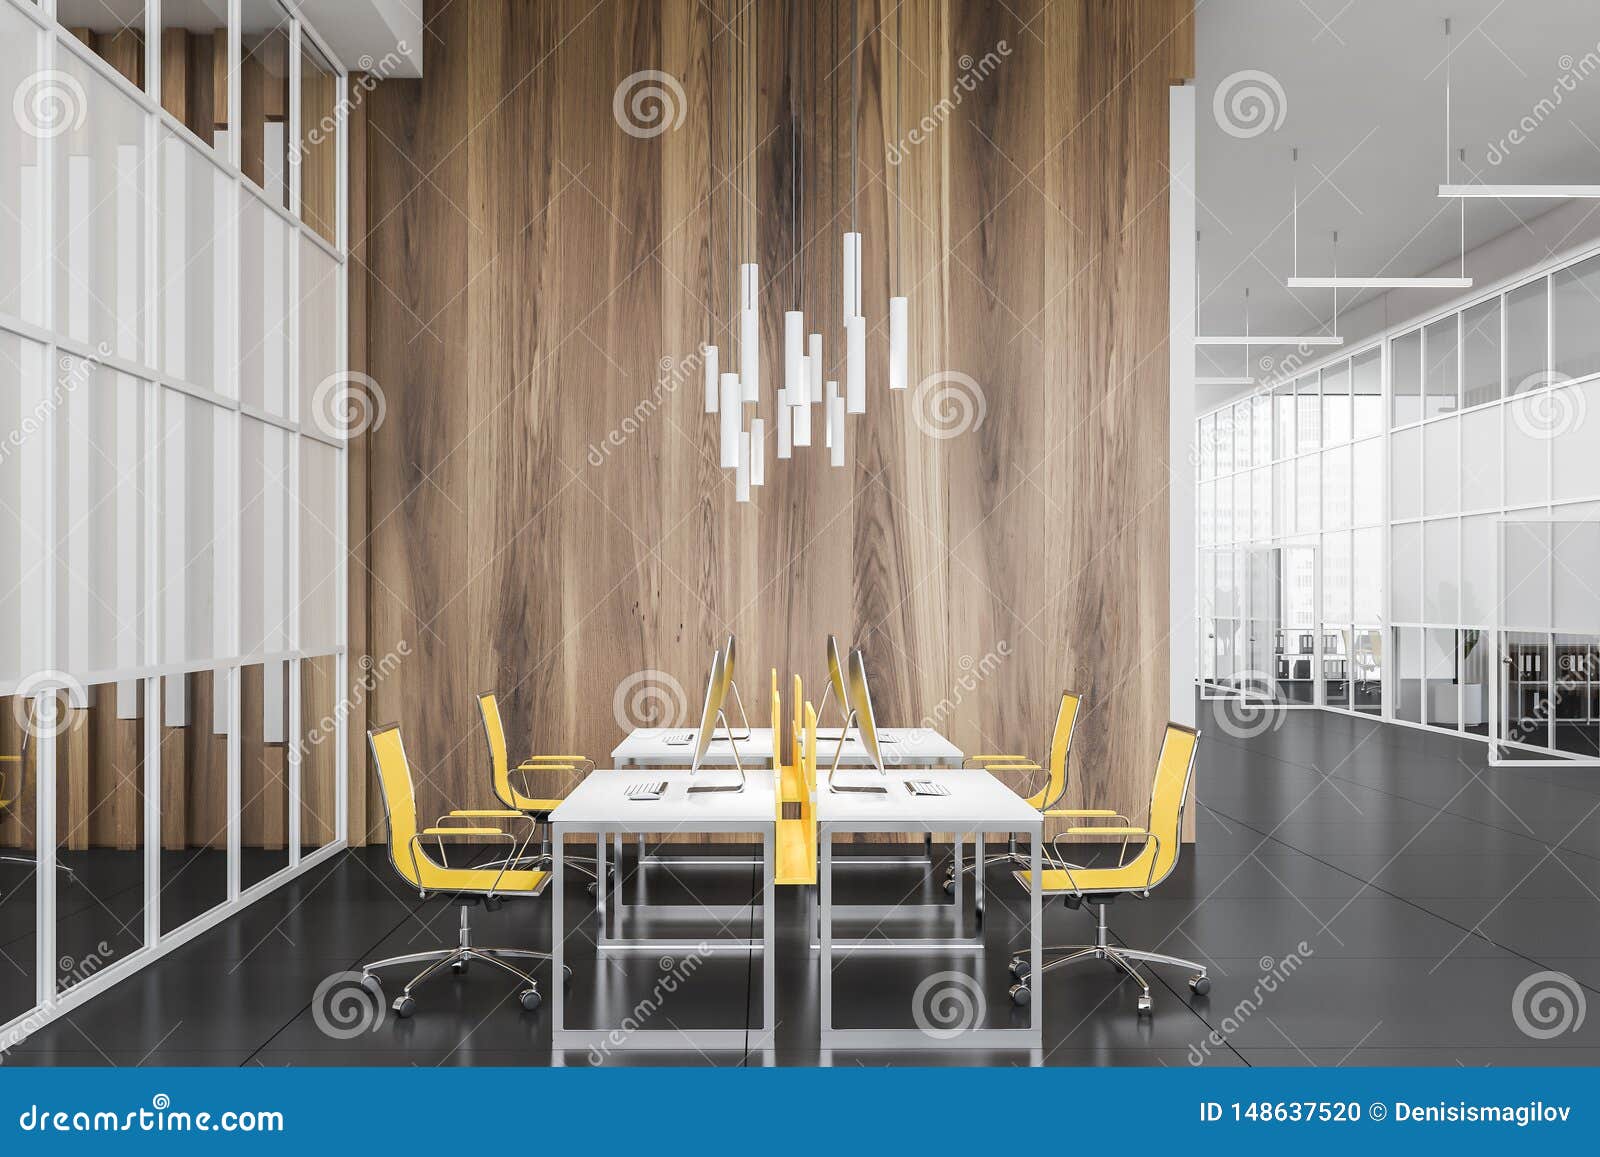 Wooden And Glass Open Space Office Interior Stock